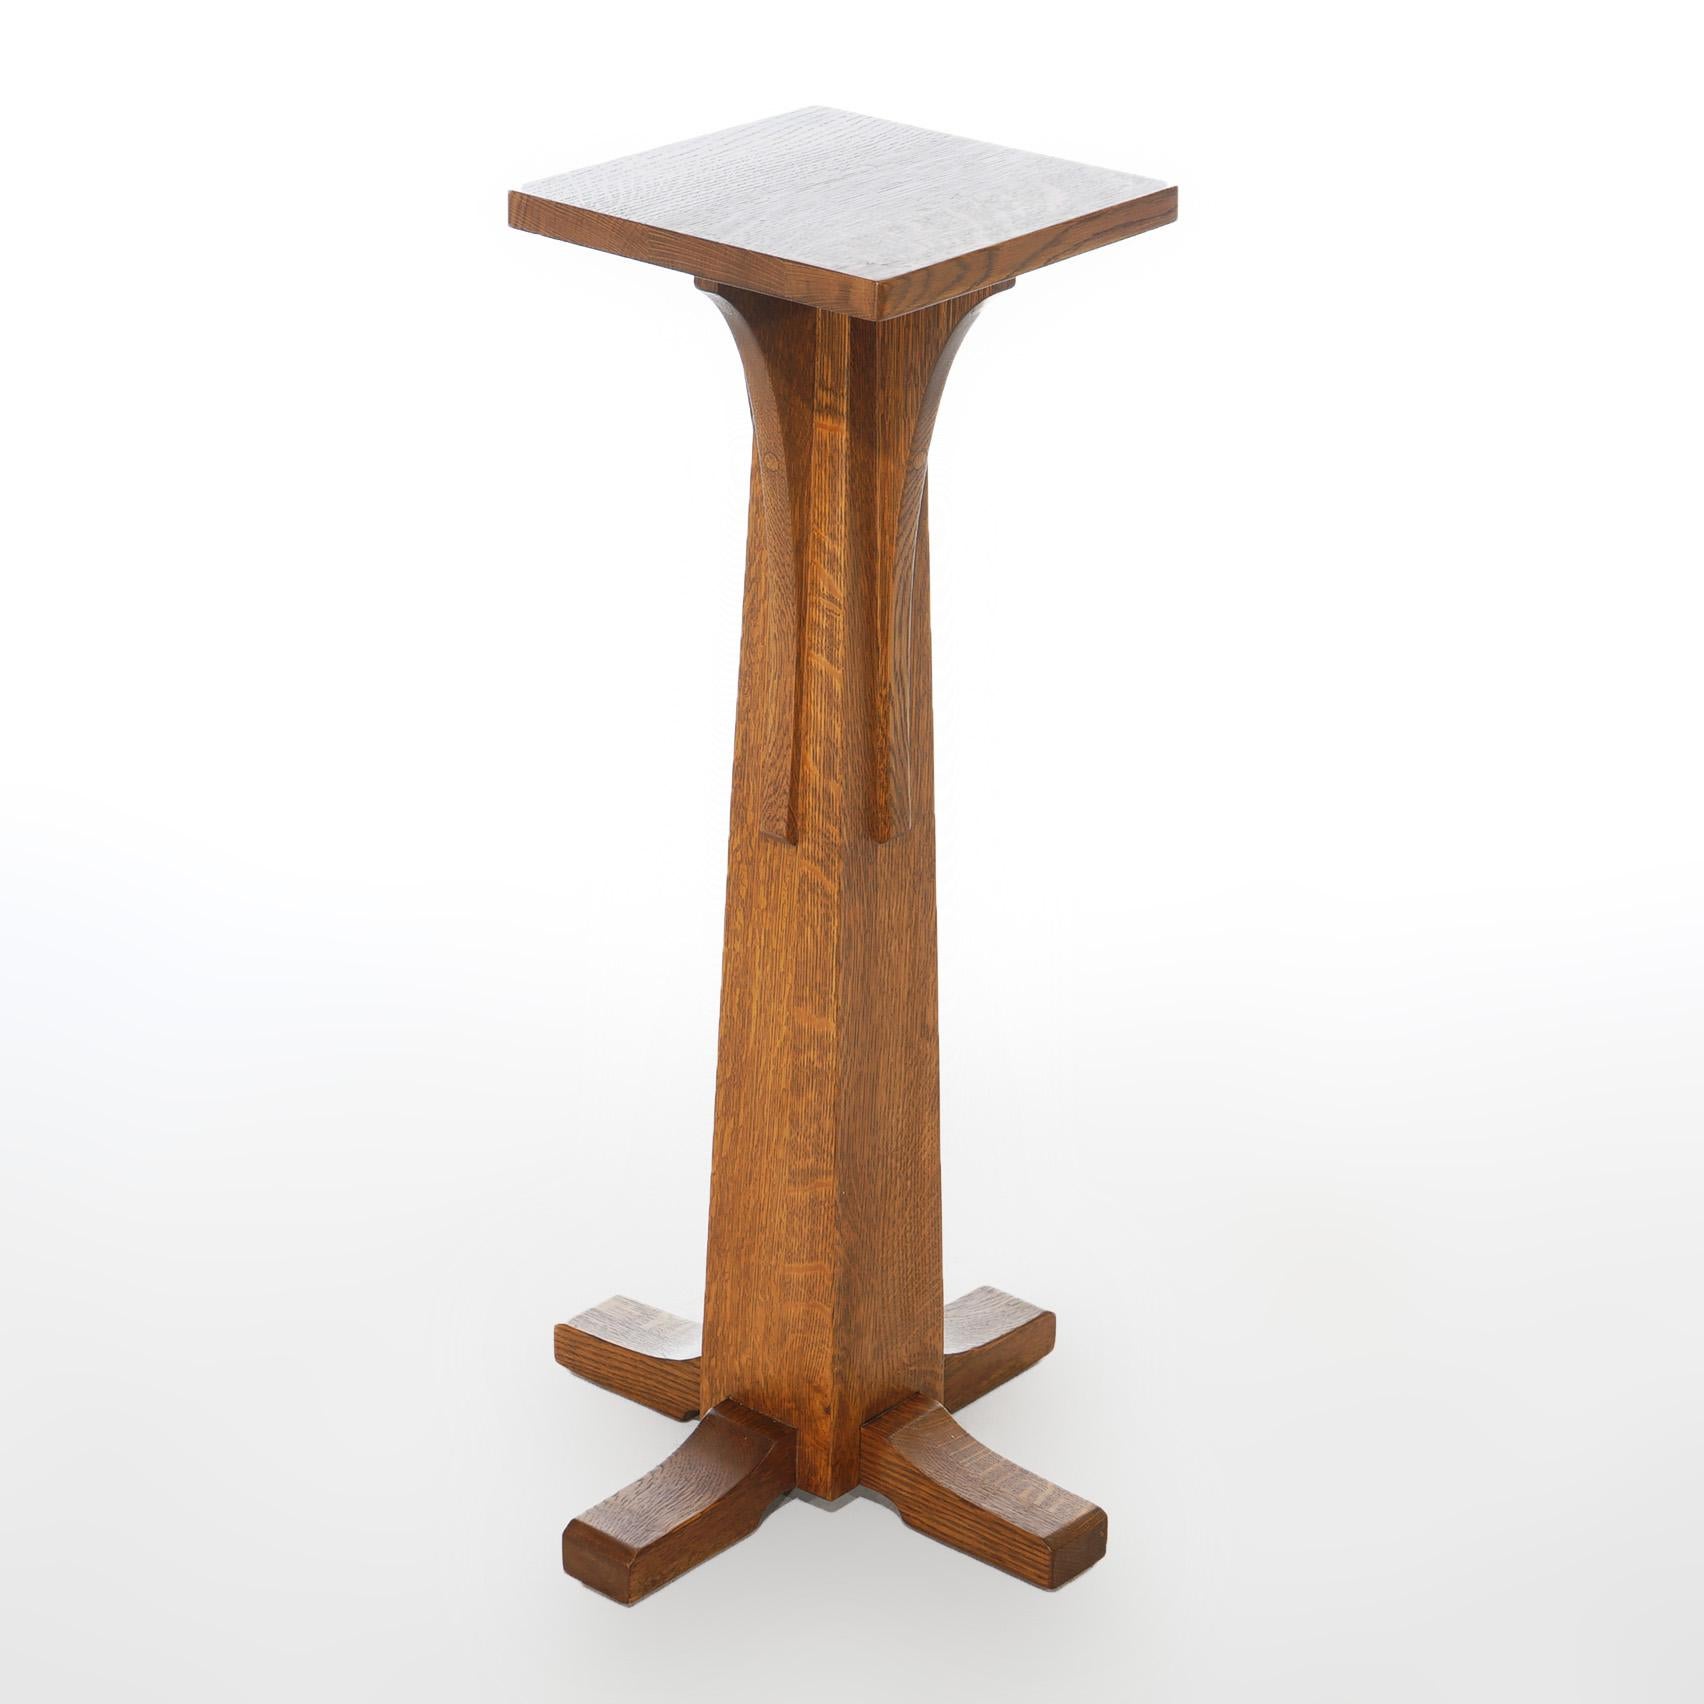 An Arts and Crafts Mission plant stand pedestal by Stickley offers oak construction with square display over flared and footed base, maker stamp as photographed, 20th century

Measures- 36.5''H x 18''W x 18''D